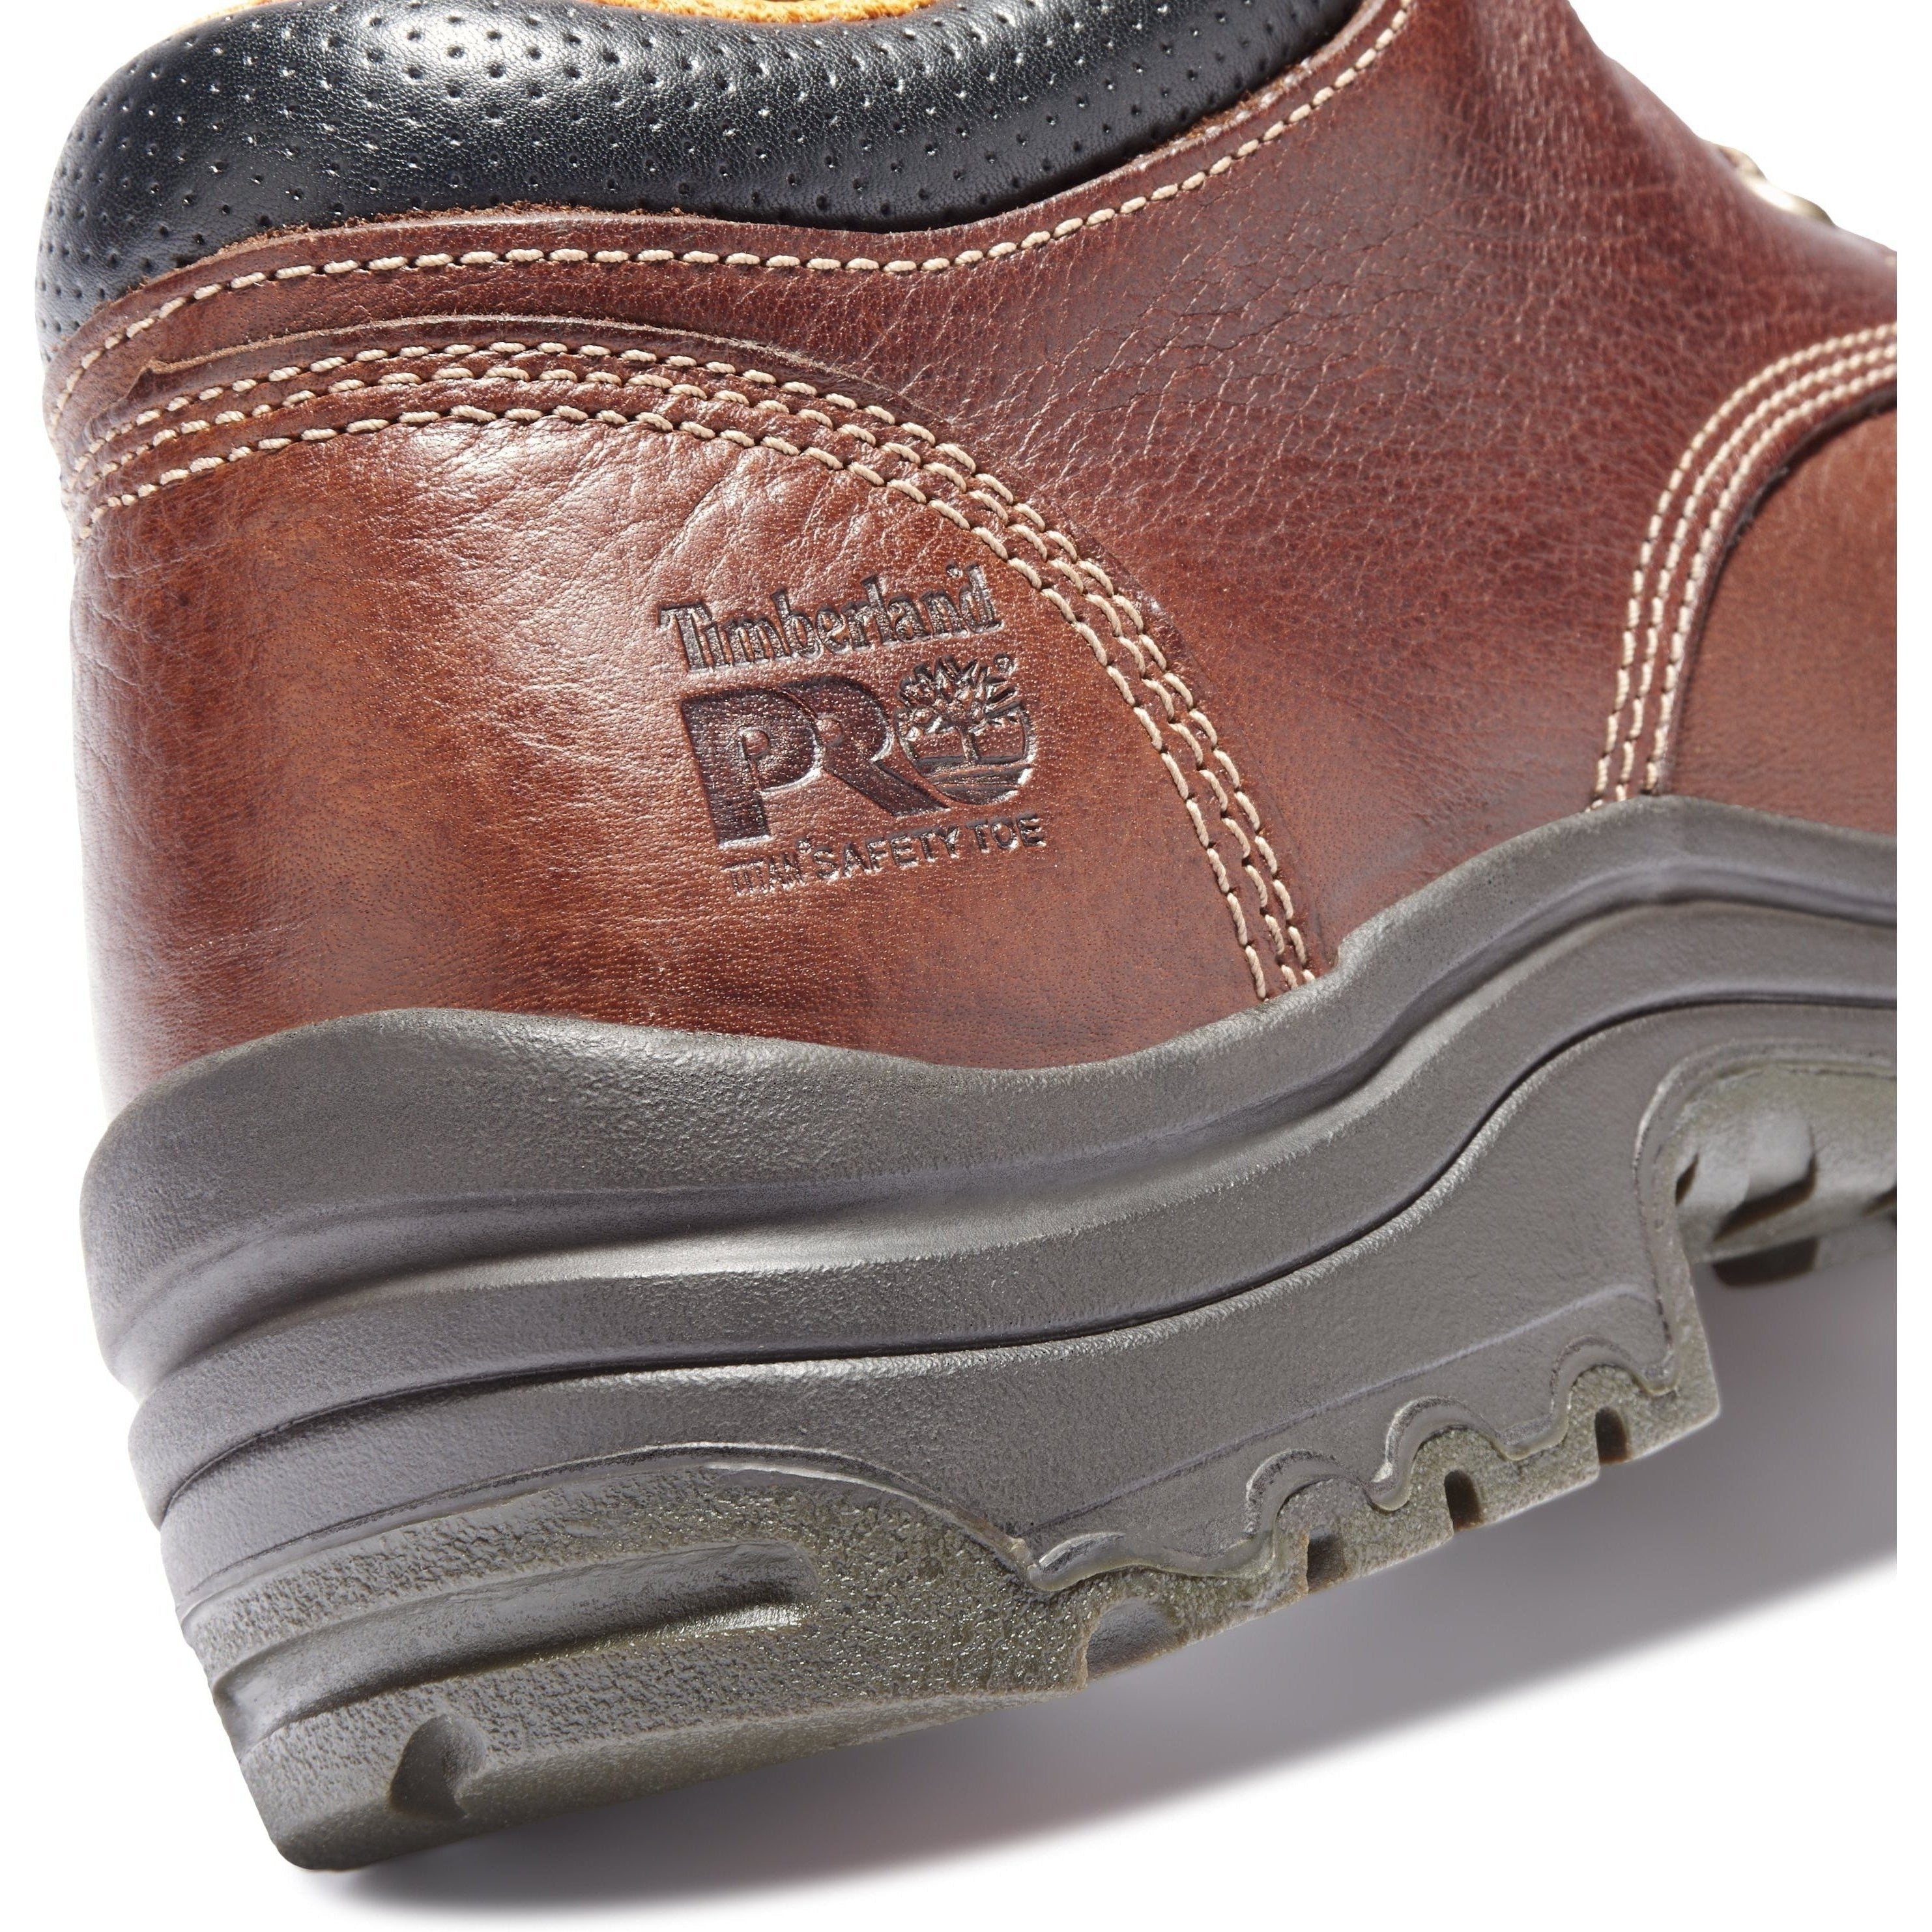 Timberland PRO Men's TiTAN Oxford Alloy Toe Work Shoe Brown TB147028210  - Overlook Boots